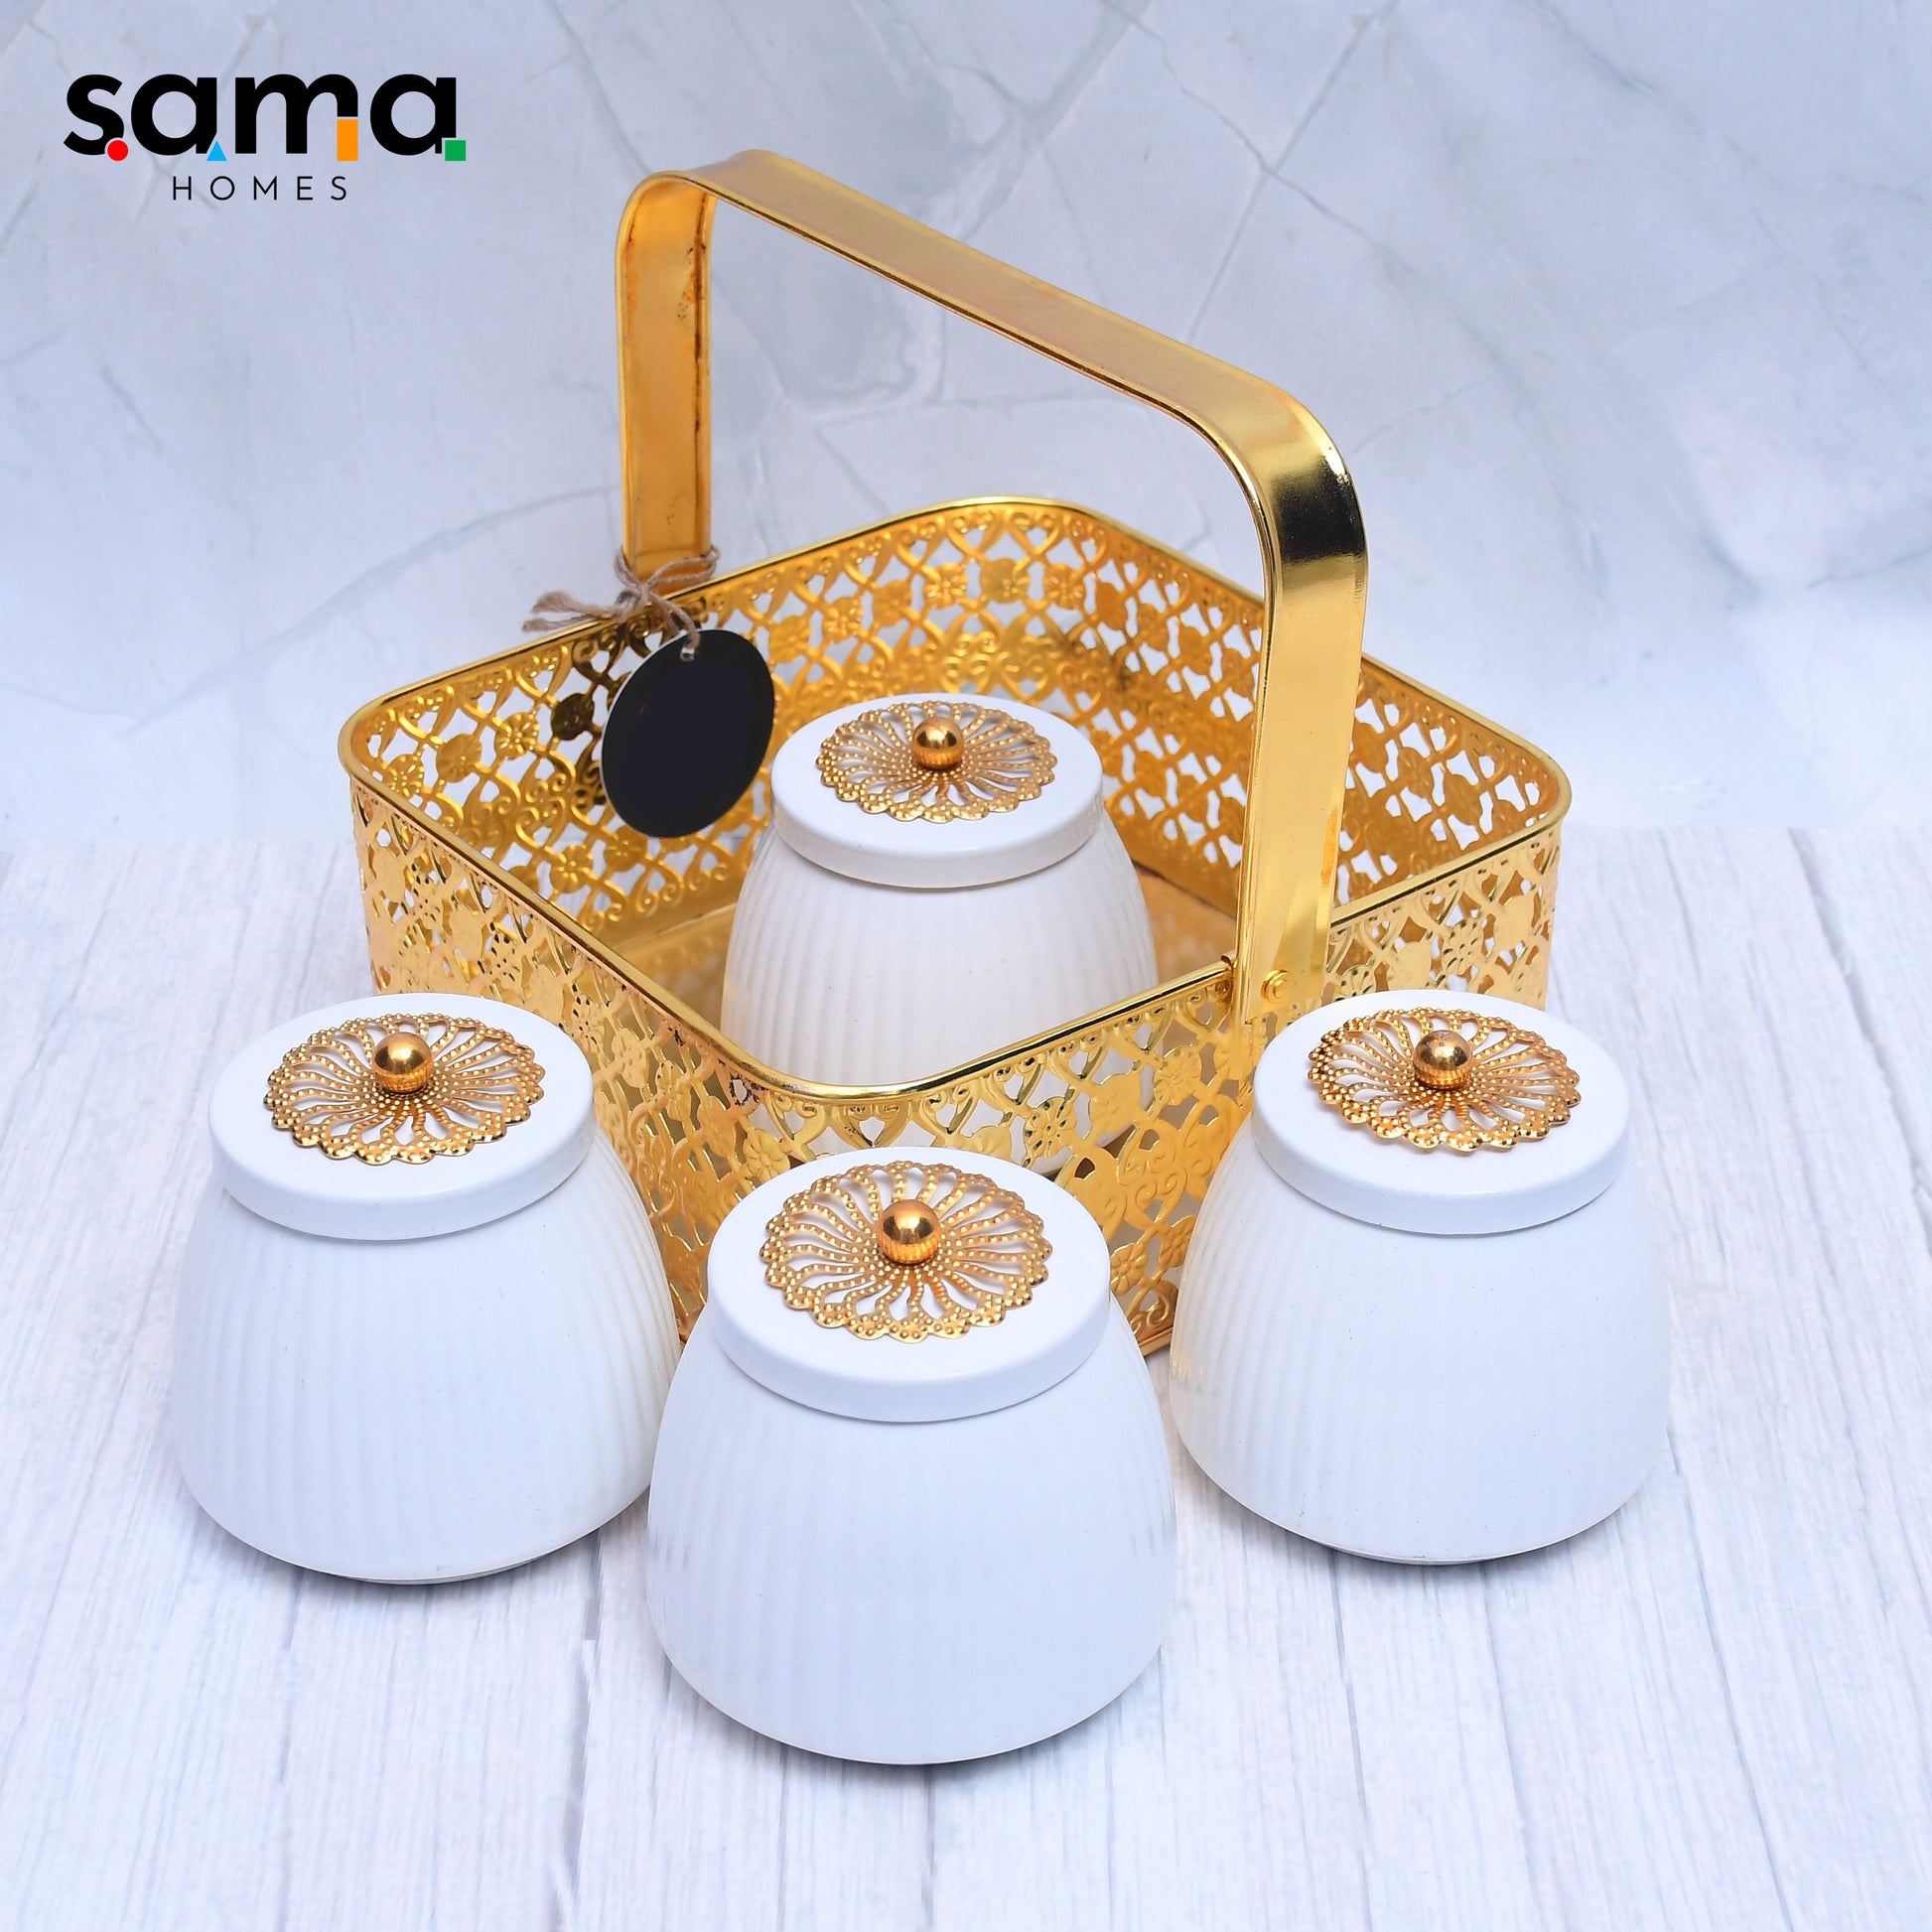 SAMA Homes - exclusive basket with 4 container for multi purposes